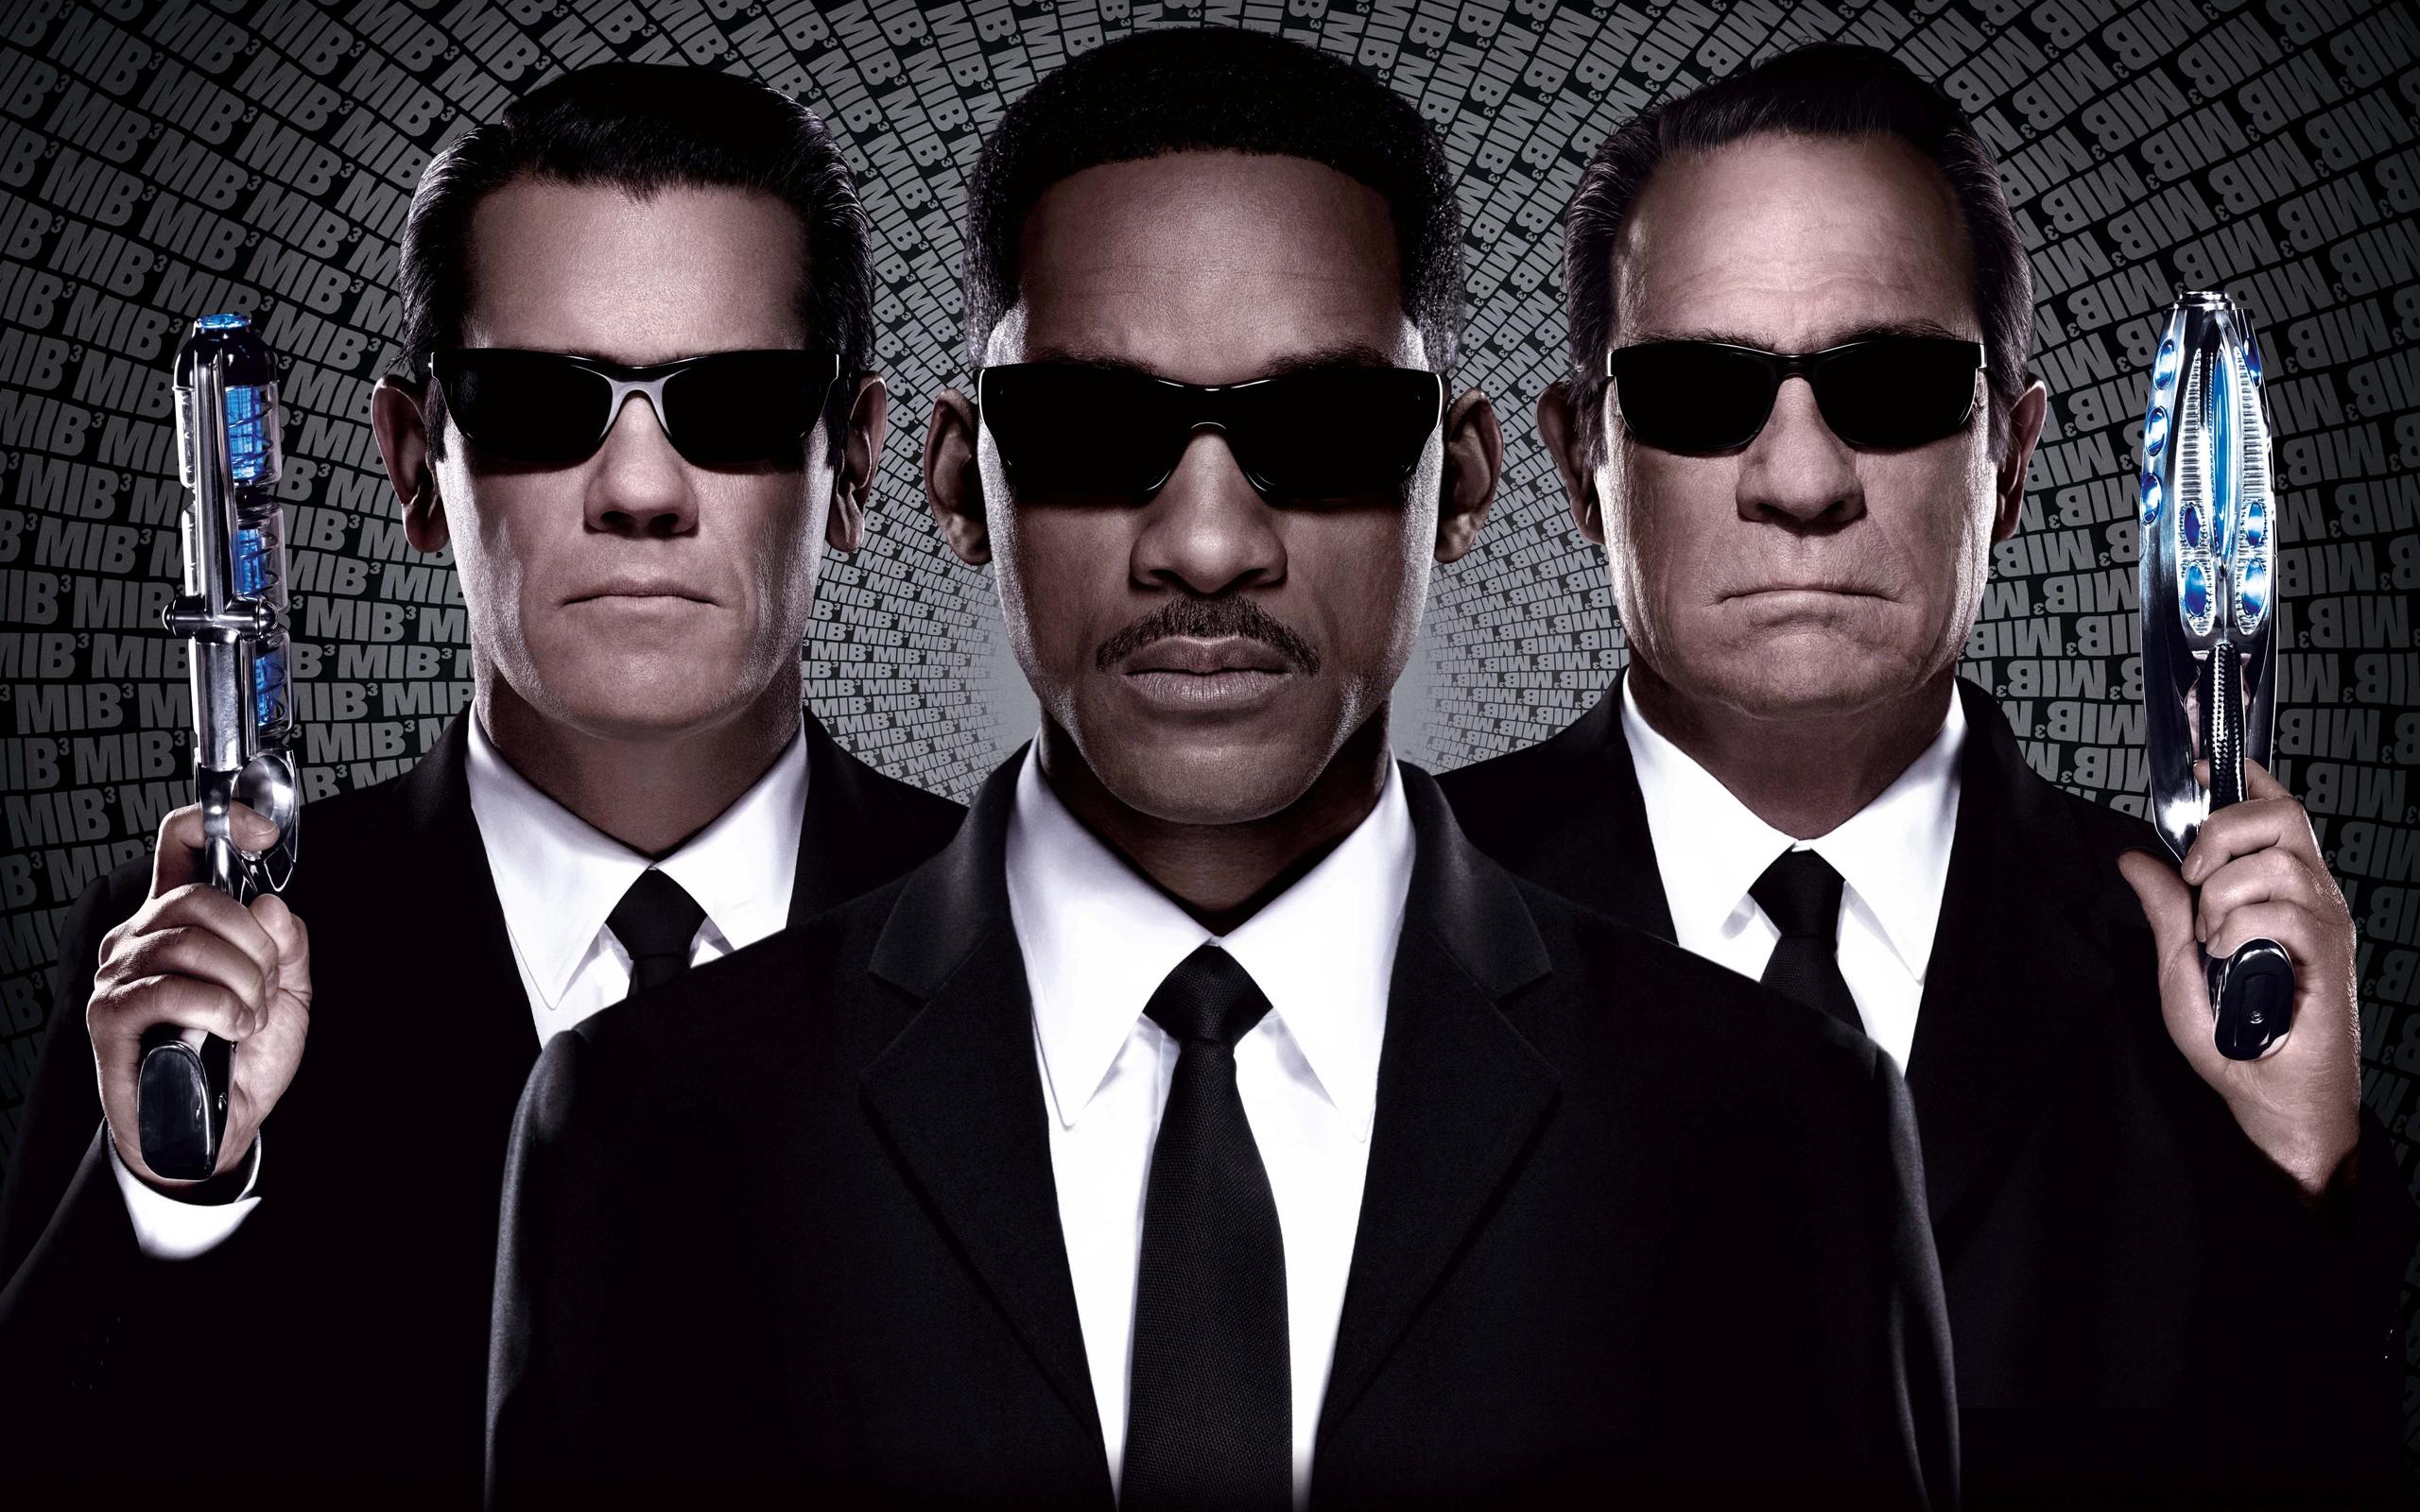 Sony Begins Work On New Men In Black Movie, Will Smith Can Be Back [EXCLUSIVE]